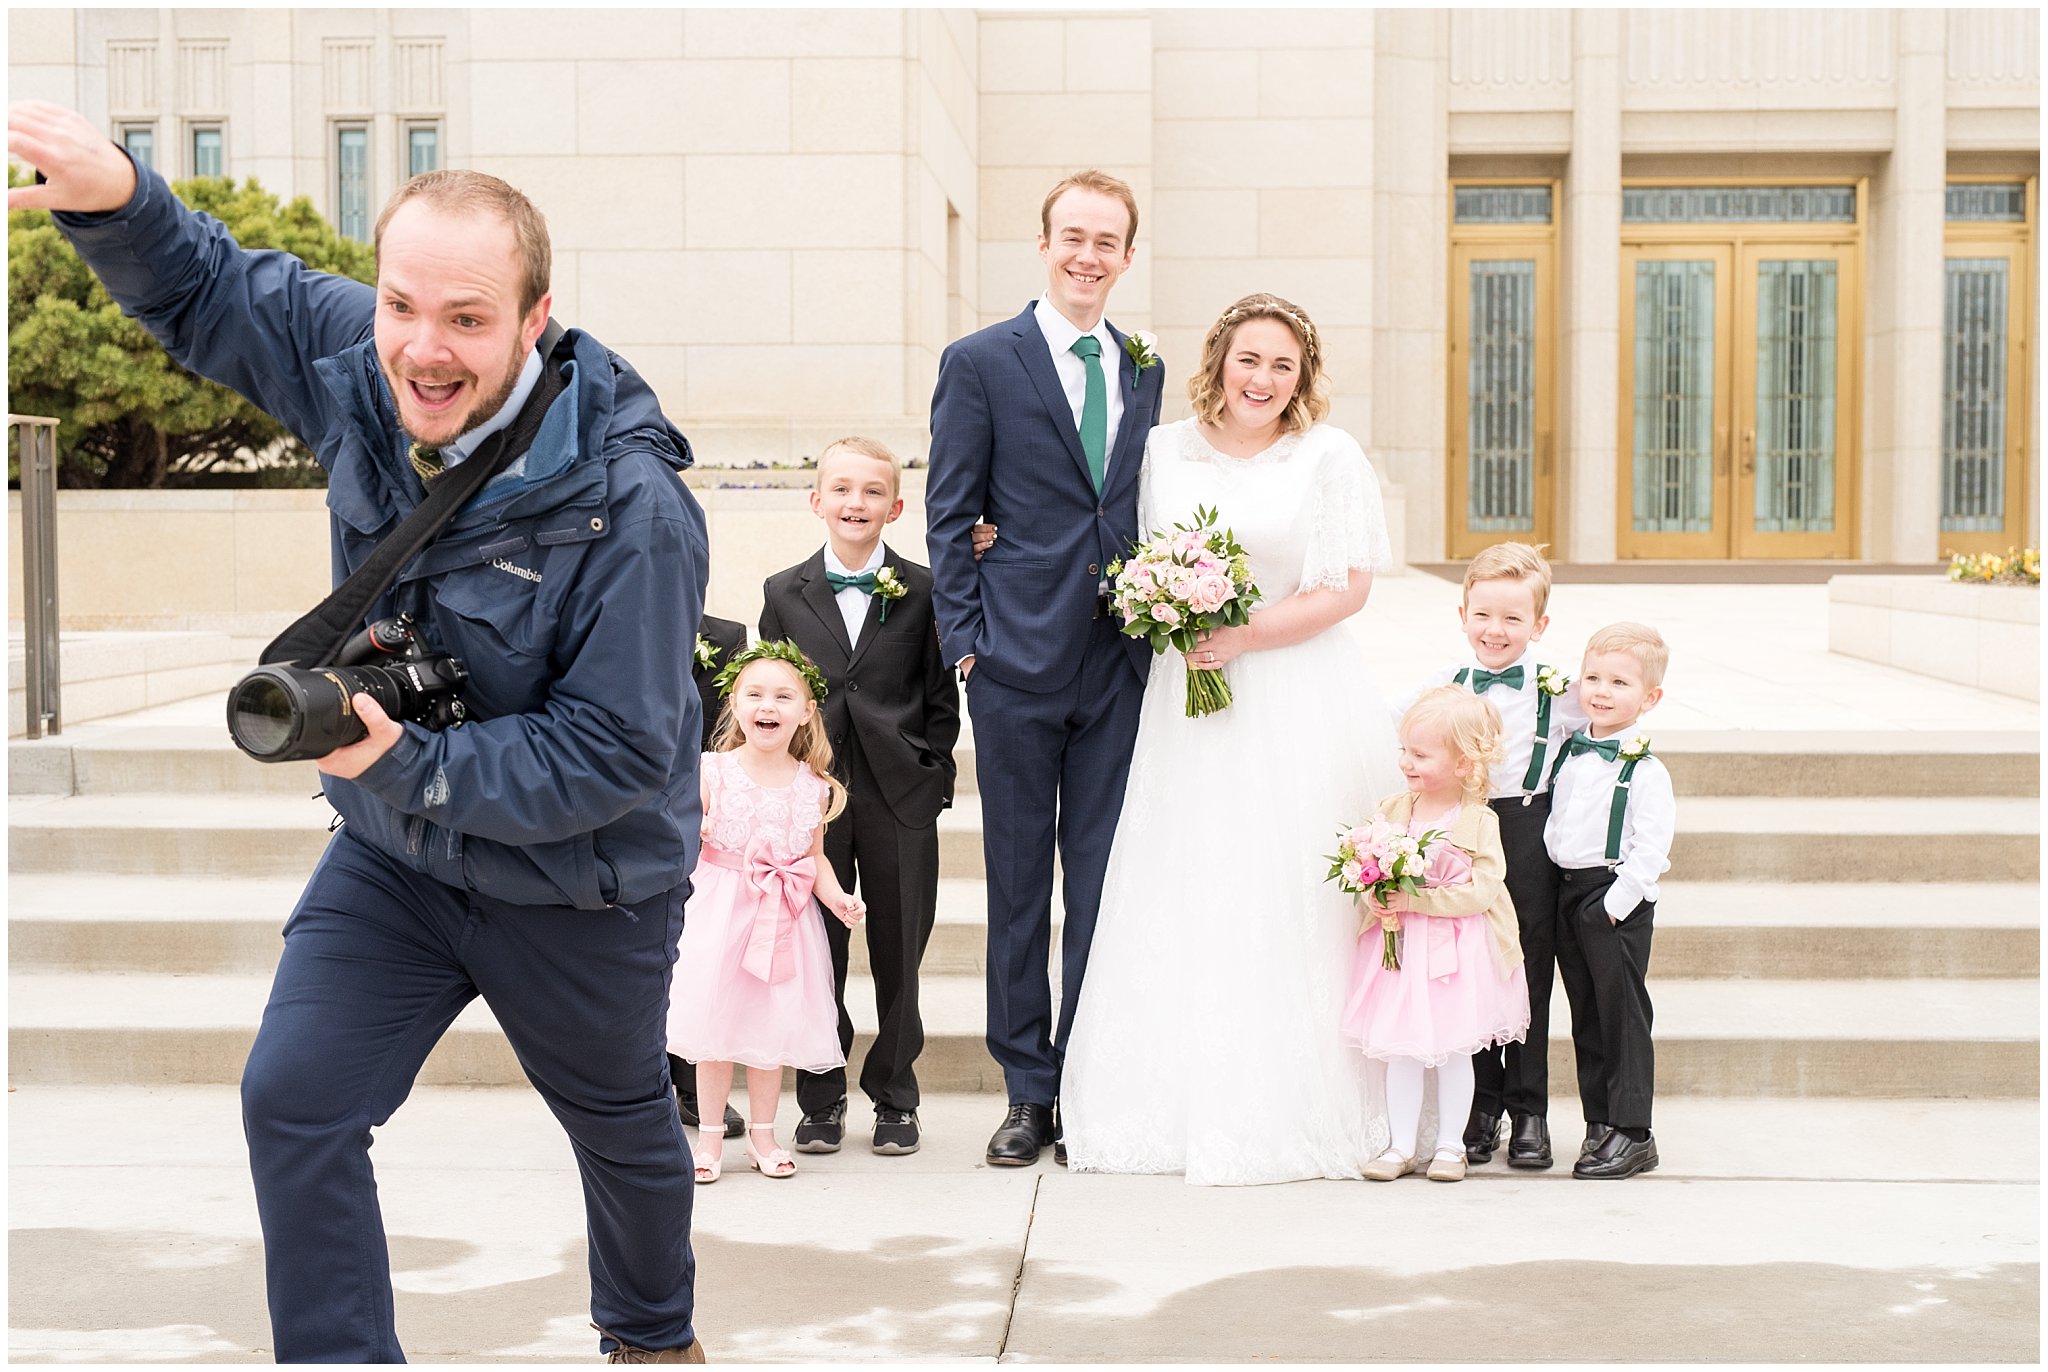 Utah Photographers at the Ogden Temple | Husband and Wife Photography Team | Jessie and Dallin Photography